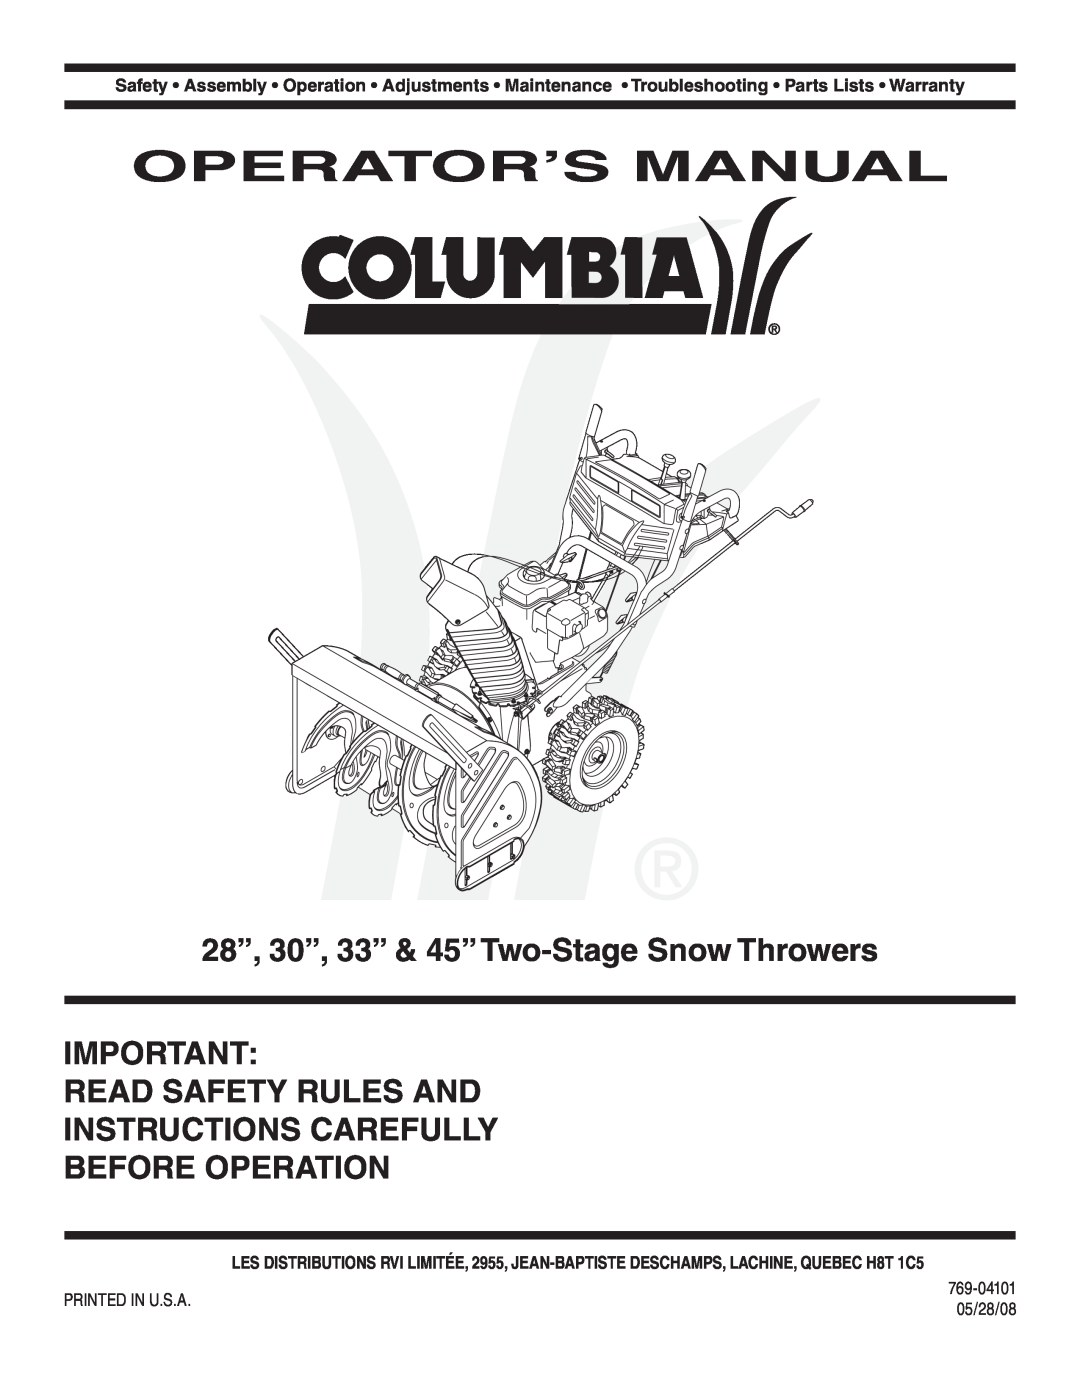 MTD 769-04101 warranty Operator’S Manual, 28”, 30”, 33” & 45”Two-Stage Snow Throwers, 05/28/08 